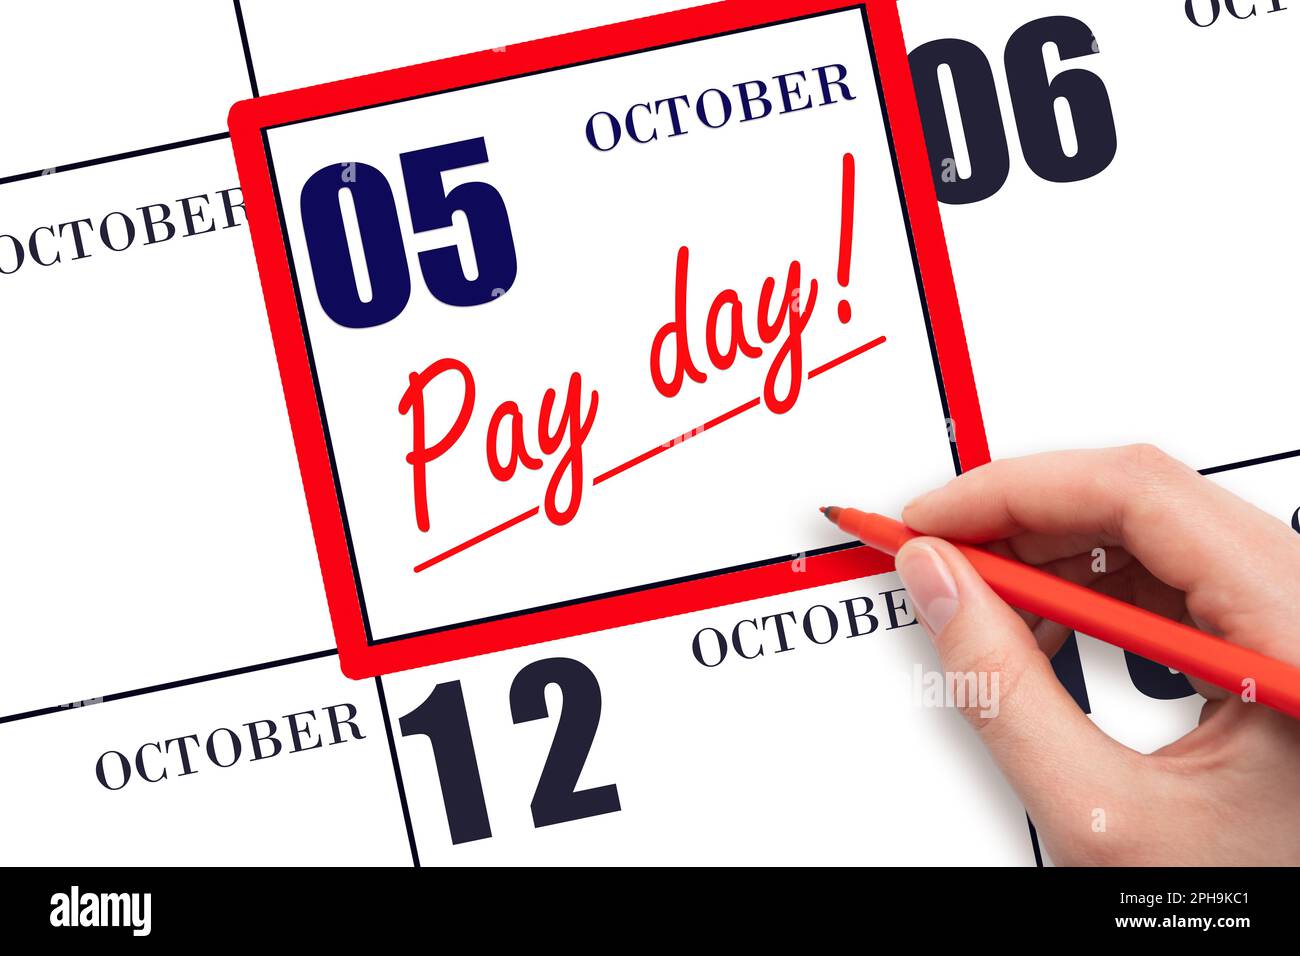 5th day of October. Hand writing text PAY DATE on calendar date October 5 and underline it. Payment due date.  Reminder concept of payment. Autumn mon Stock Photo